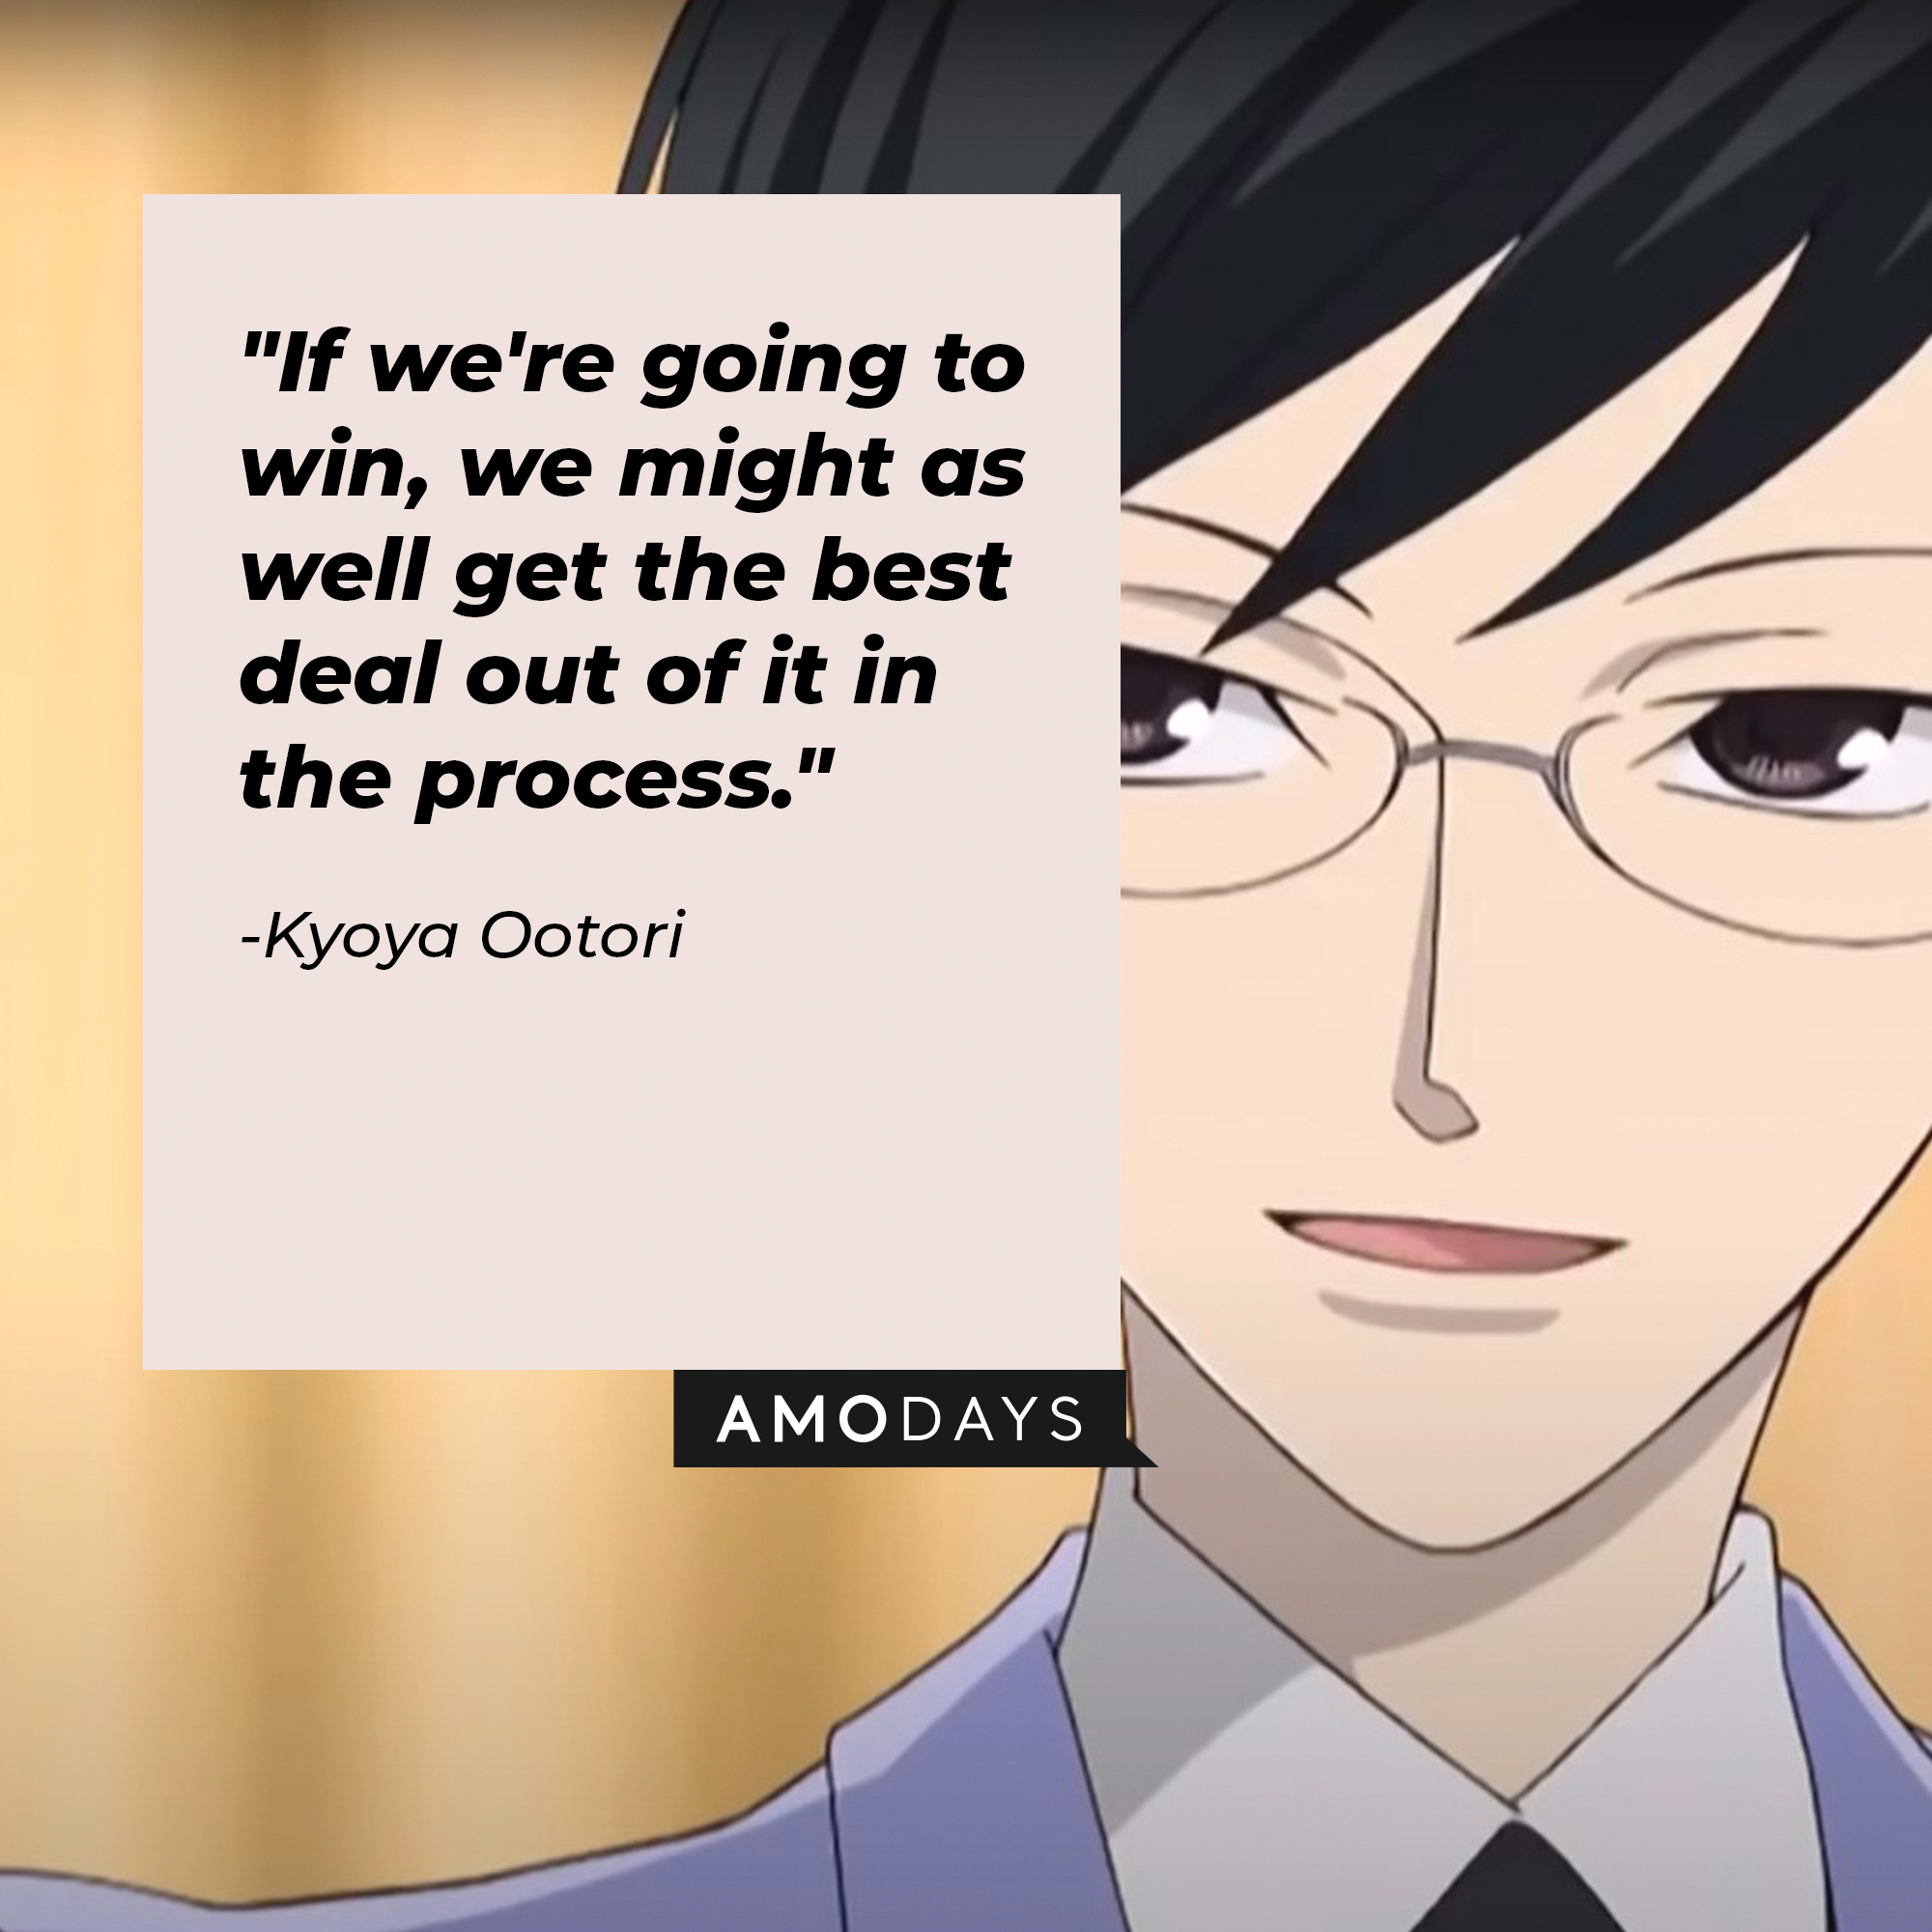 Kyoya Ootori's quote: "If we're going to win, we might as well get the best deal out of it in the process." | Source: Facebook.com/theouranhostclub